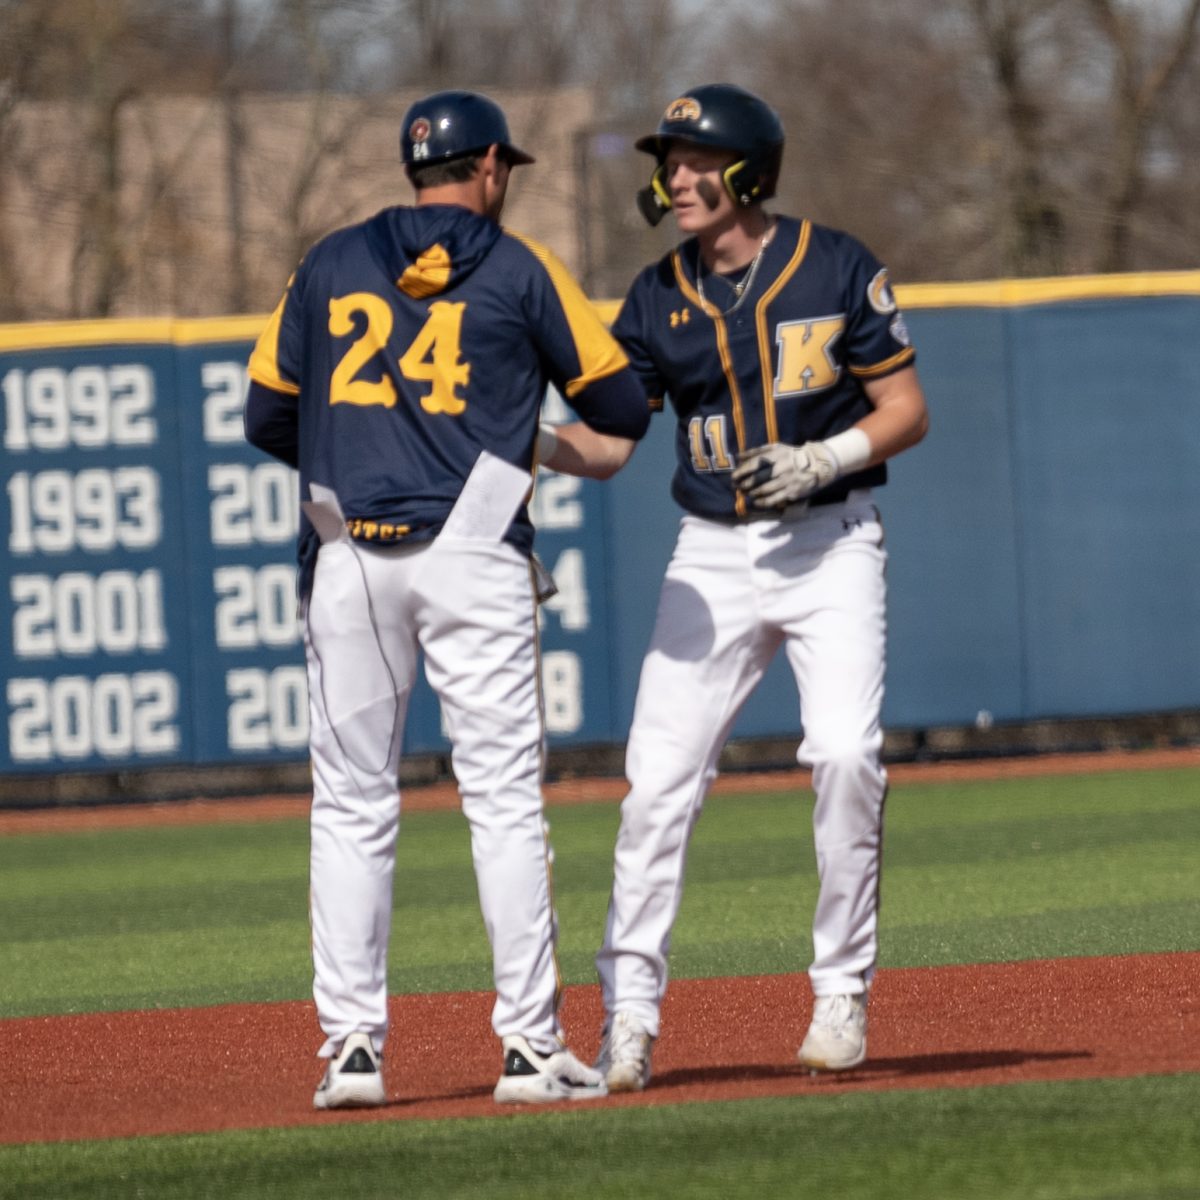 Coach+Jeff+Duncan+%28left%29+confers+with+Kolton+Schaller+following+Schallers+double+in+the+second+inning+of+the+Golden+Flashes+27-0+blowout+of+Youngstown+State+on+March+12%2C+2024.